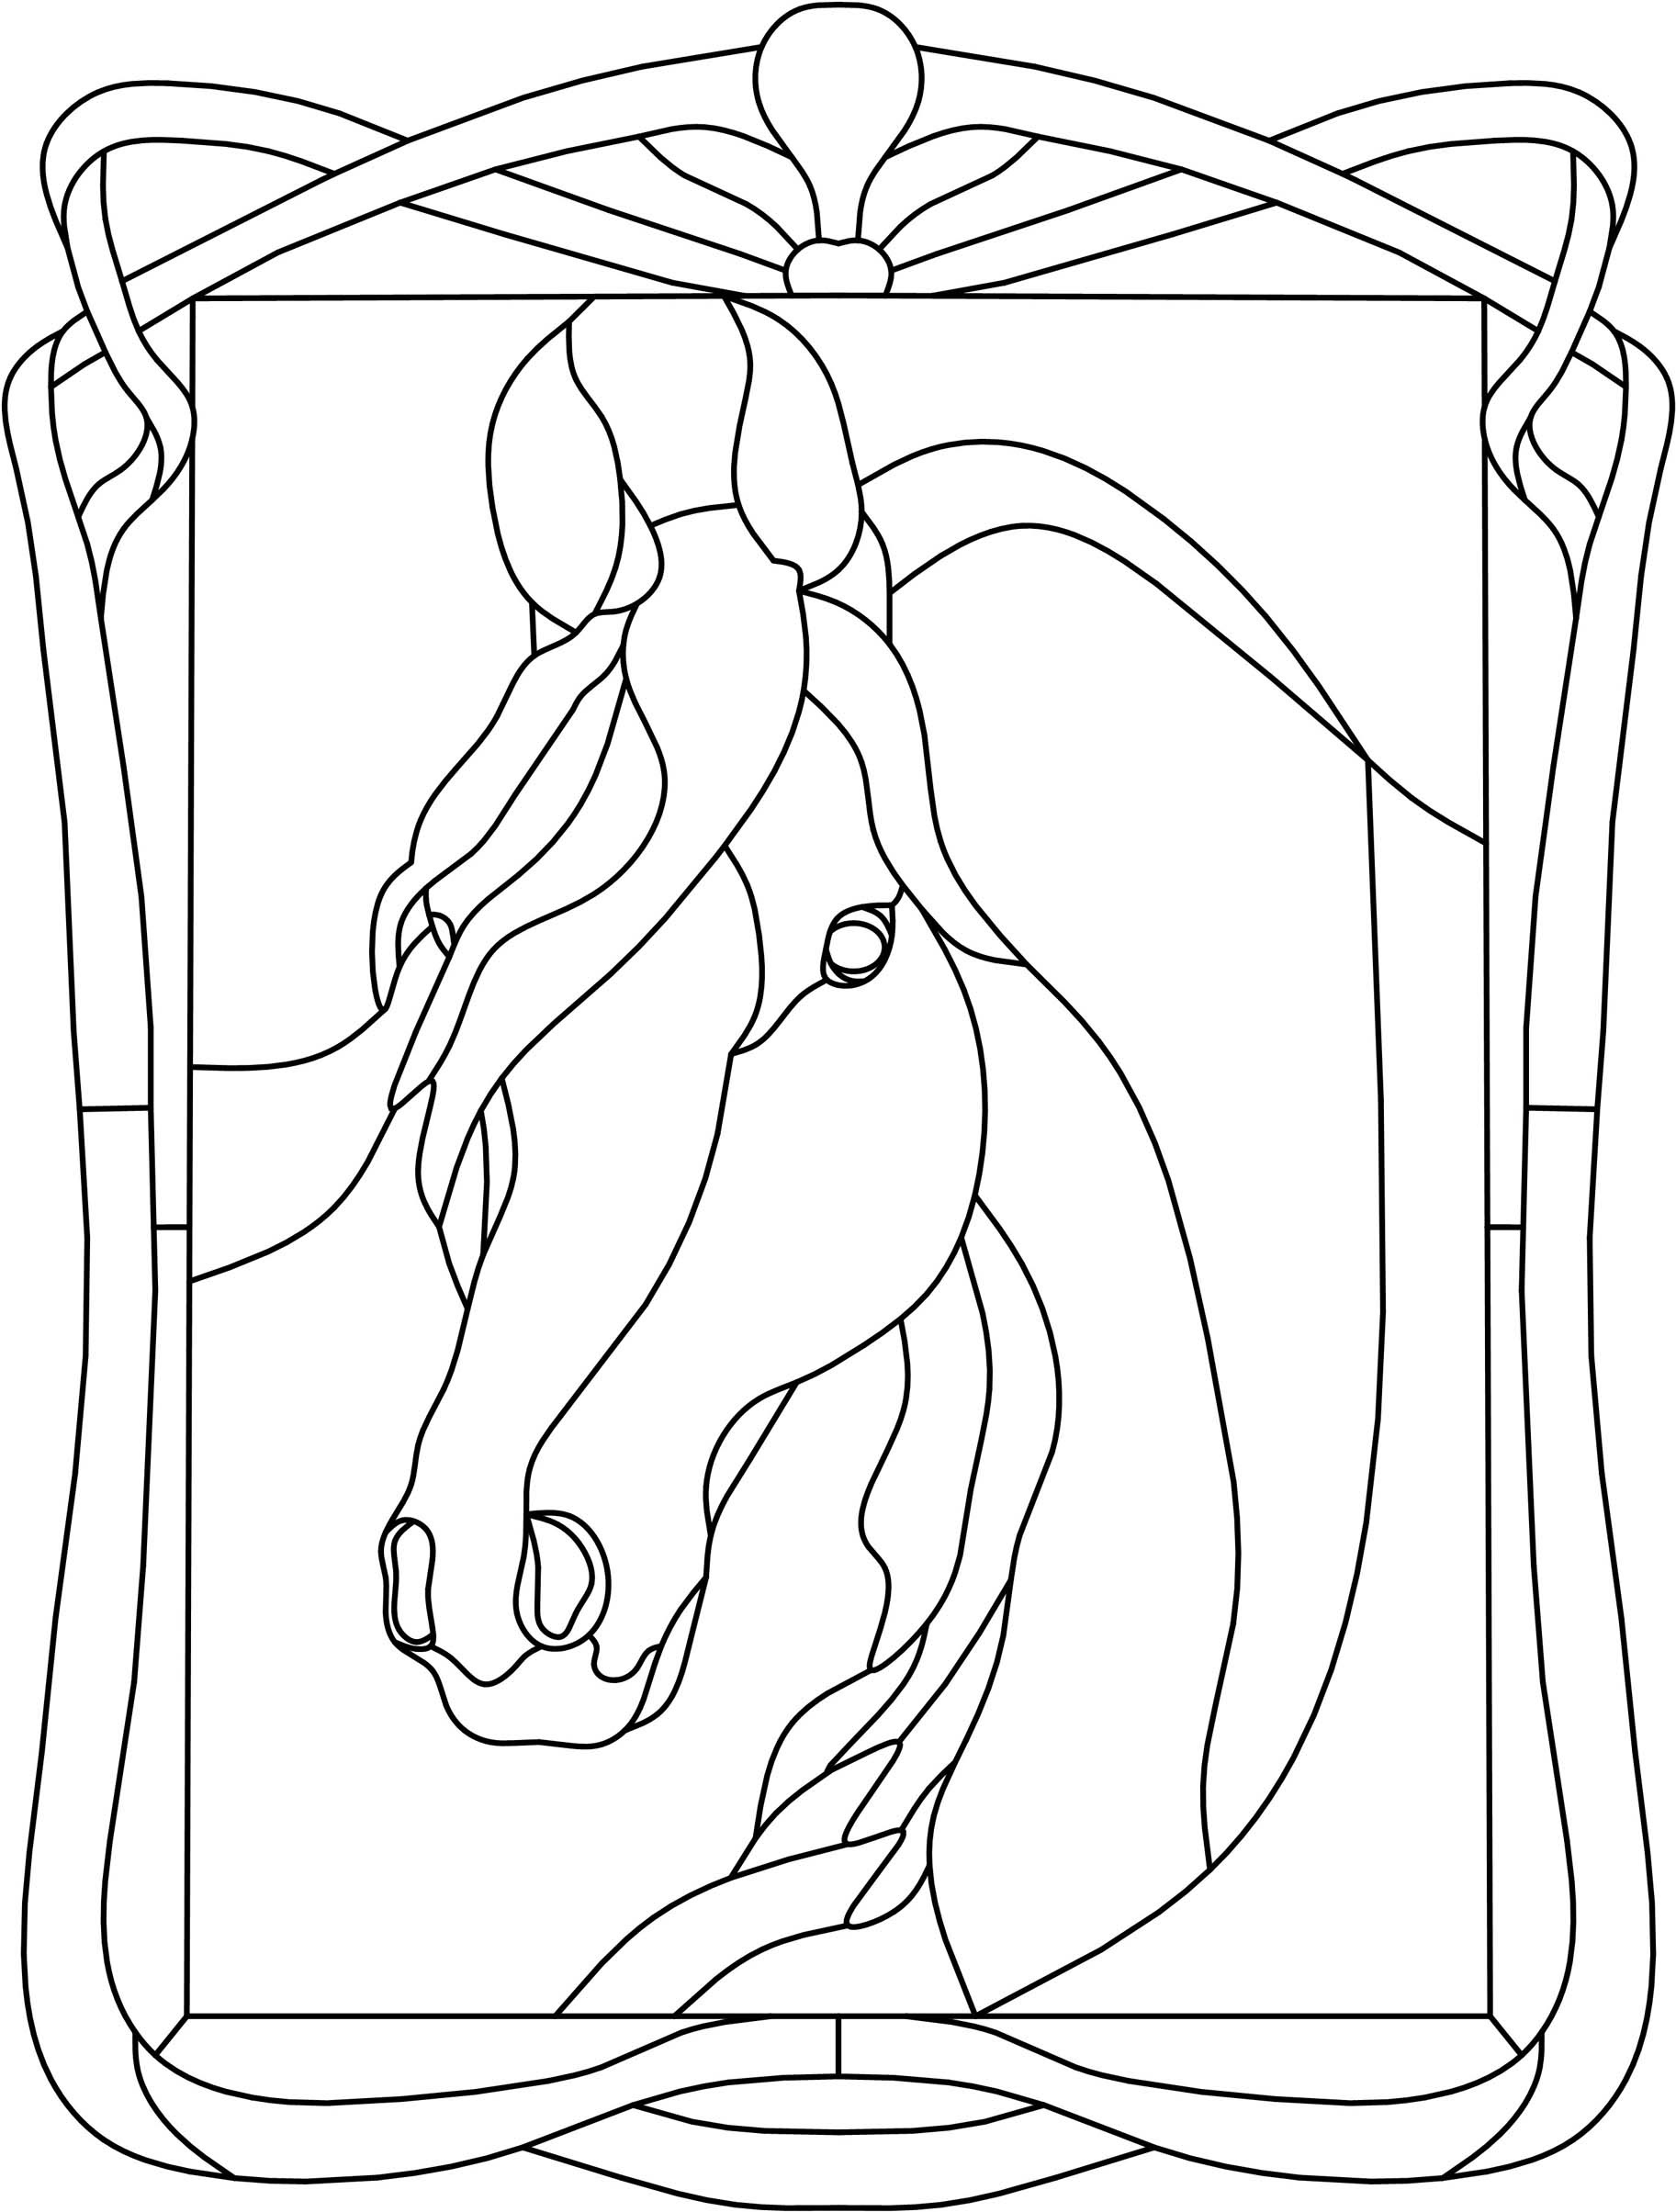 Free Stained Glass Horse Head Patterns - Glasses Blog